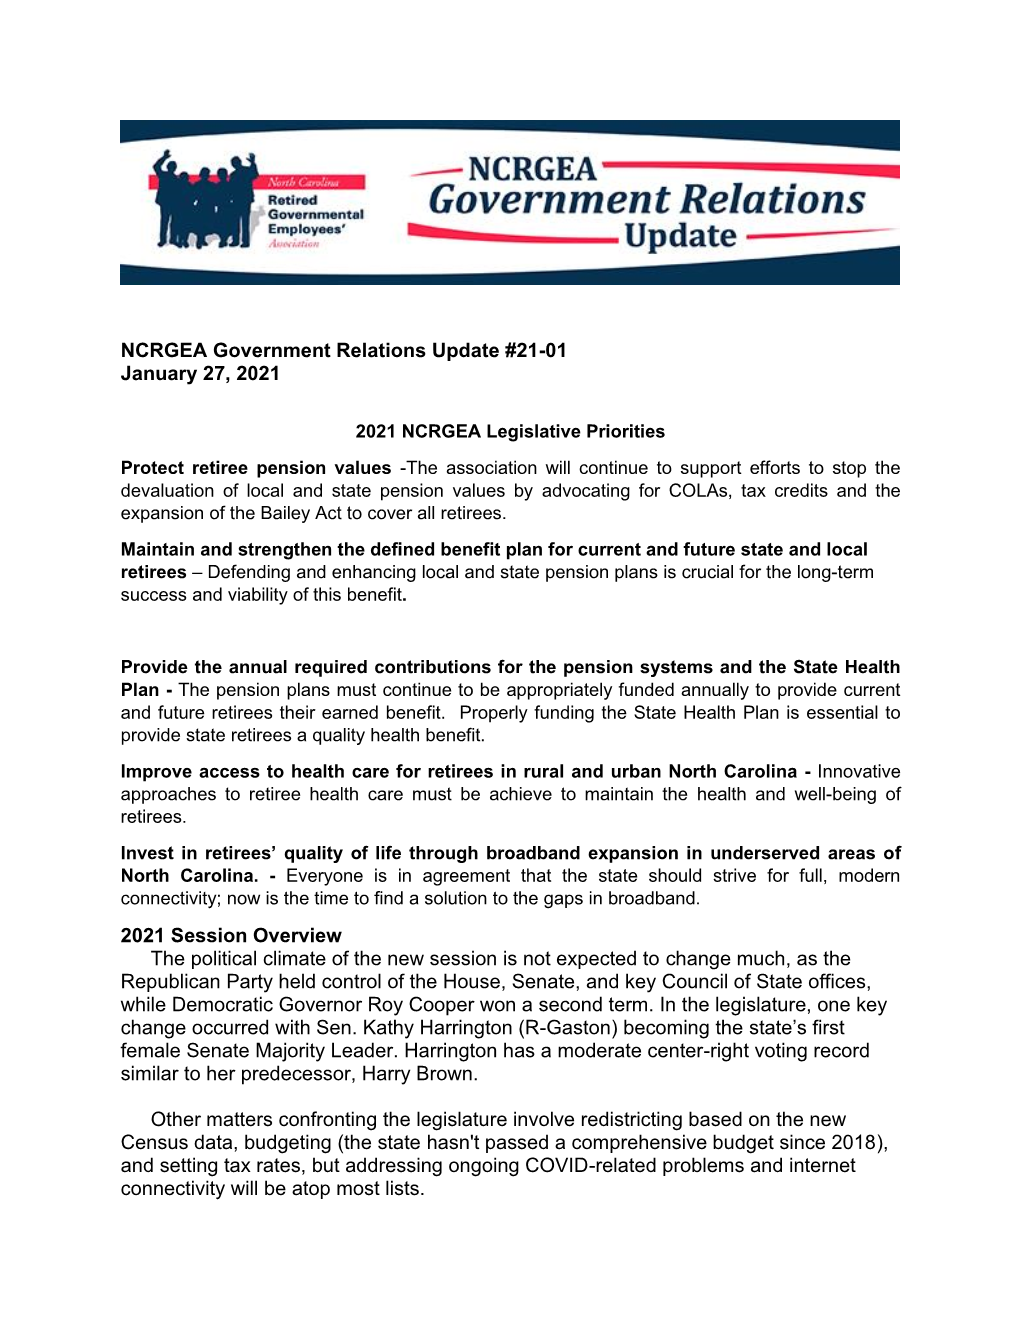 NCRGEA Government Relations Update #21-01 January 27, 2021